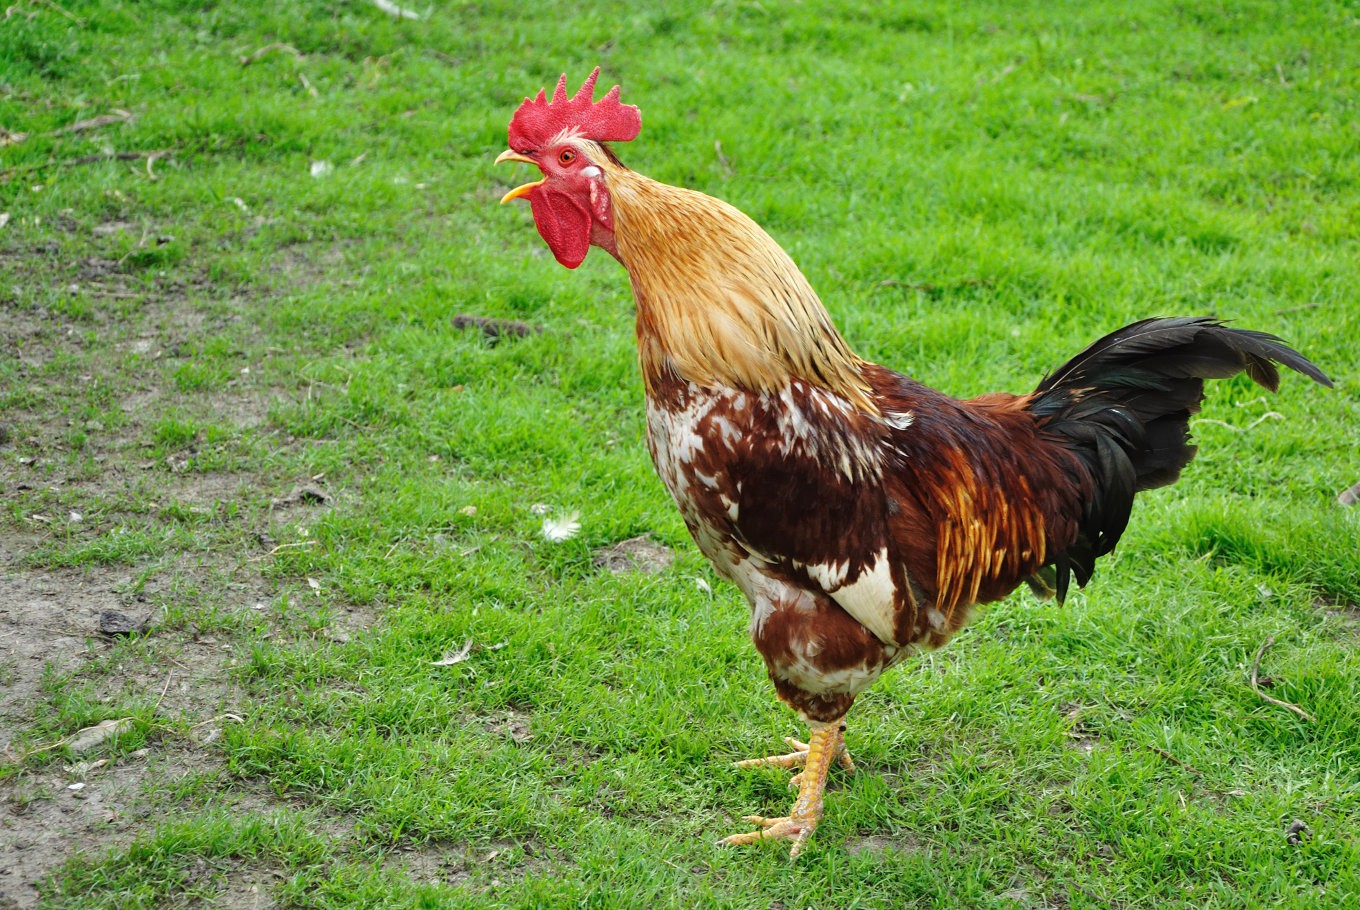 When Will A Rooster Start Crowing - They will often start crowing when a loud sound startles ...